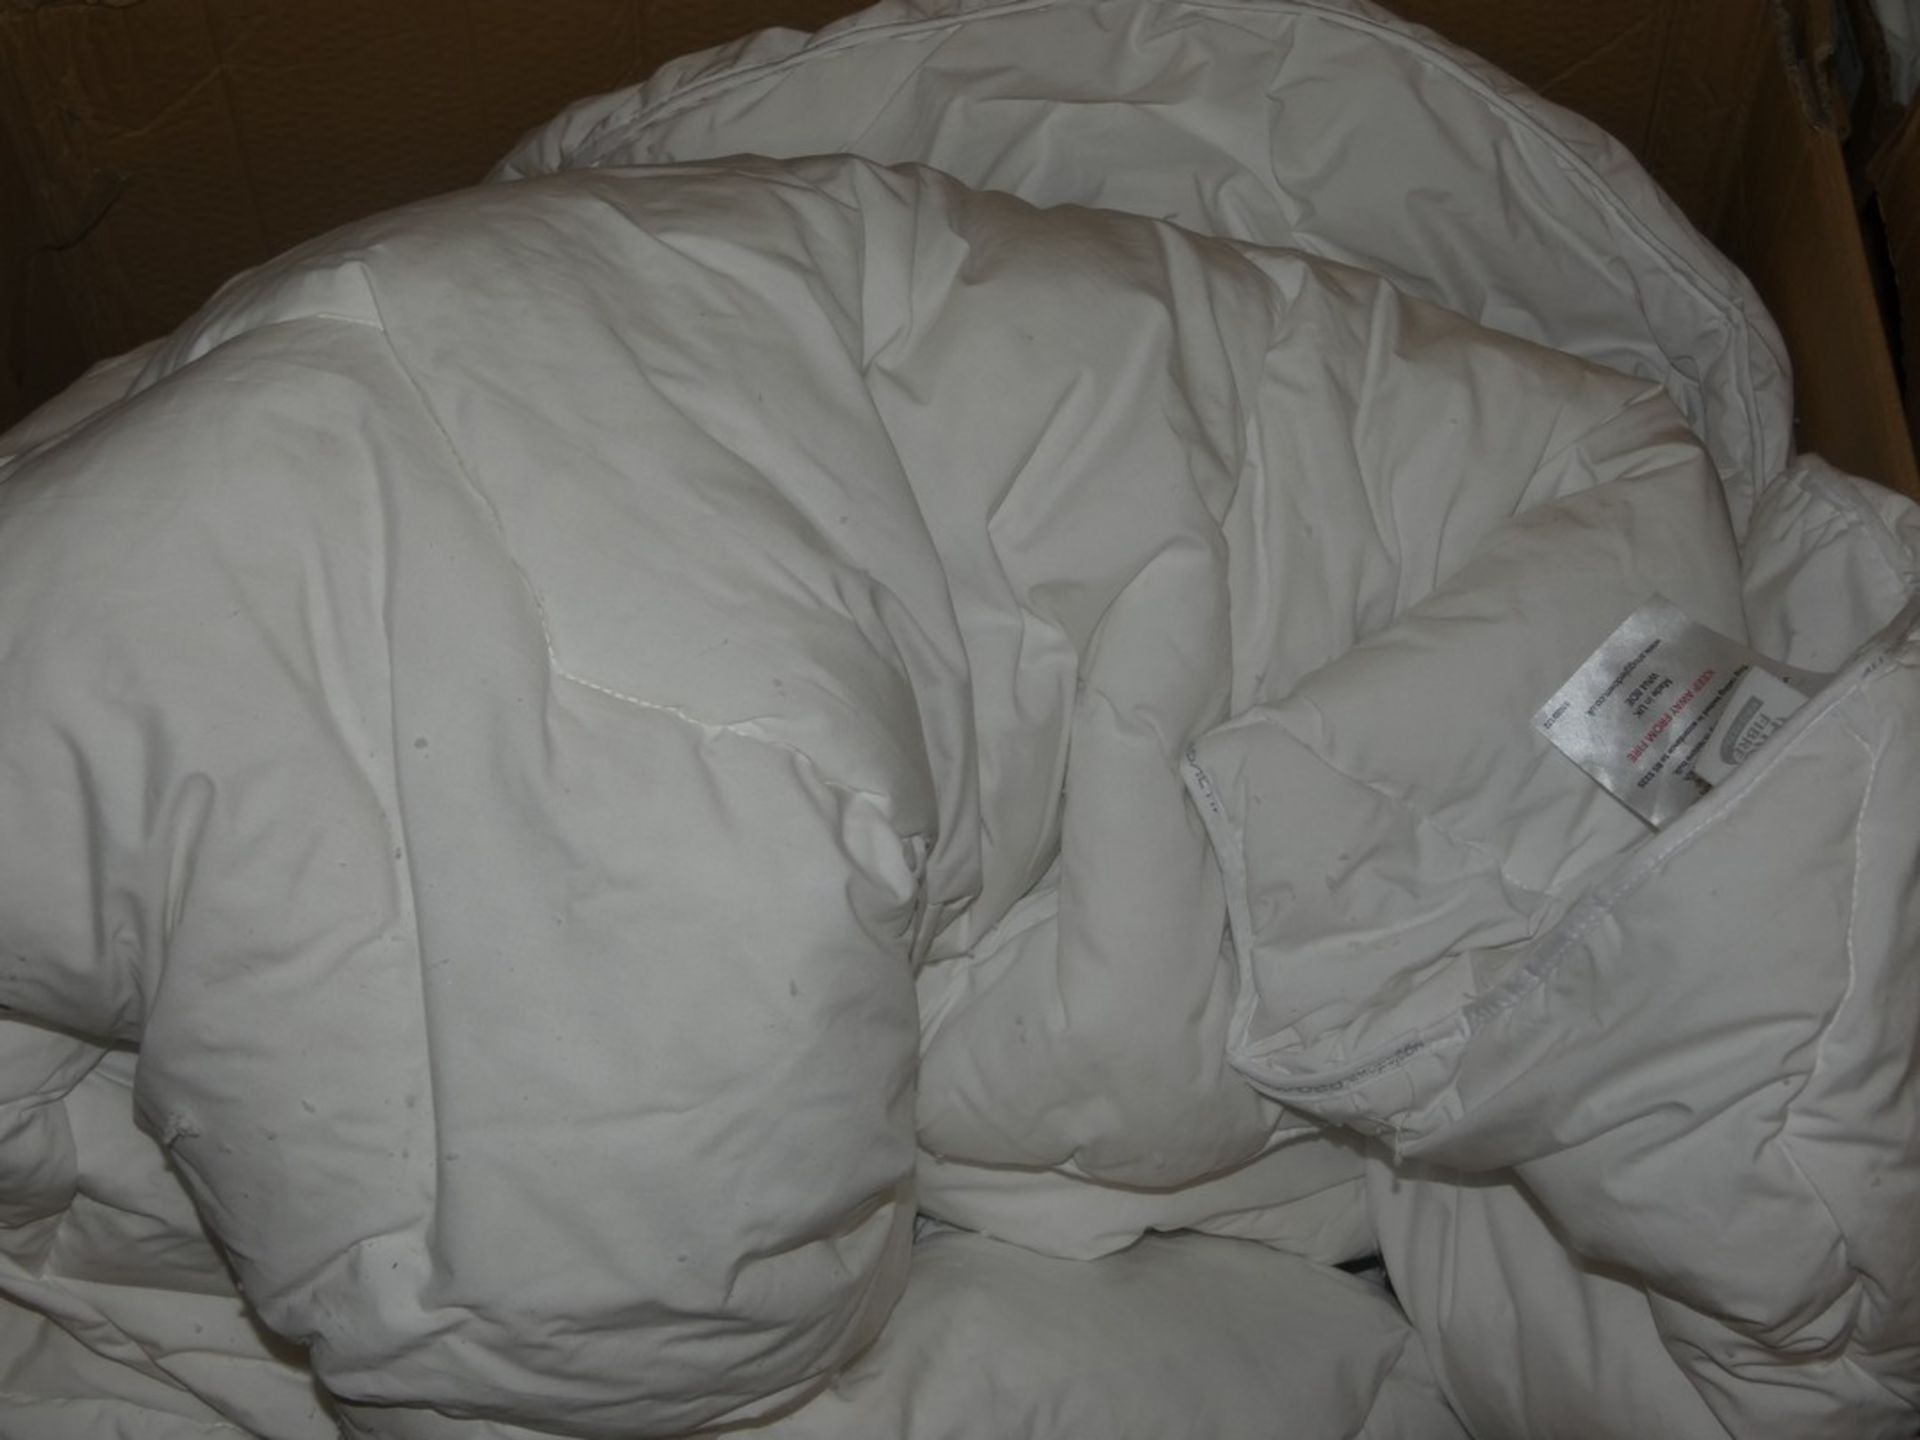 1 Boxed Proactive 10.5 Tog Snuggle Down Duvet Kingsize RRP £130 (RET00201015) (Viewings And